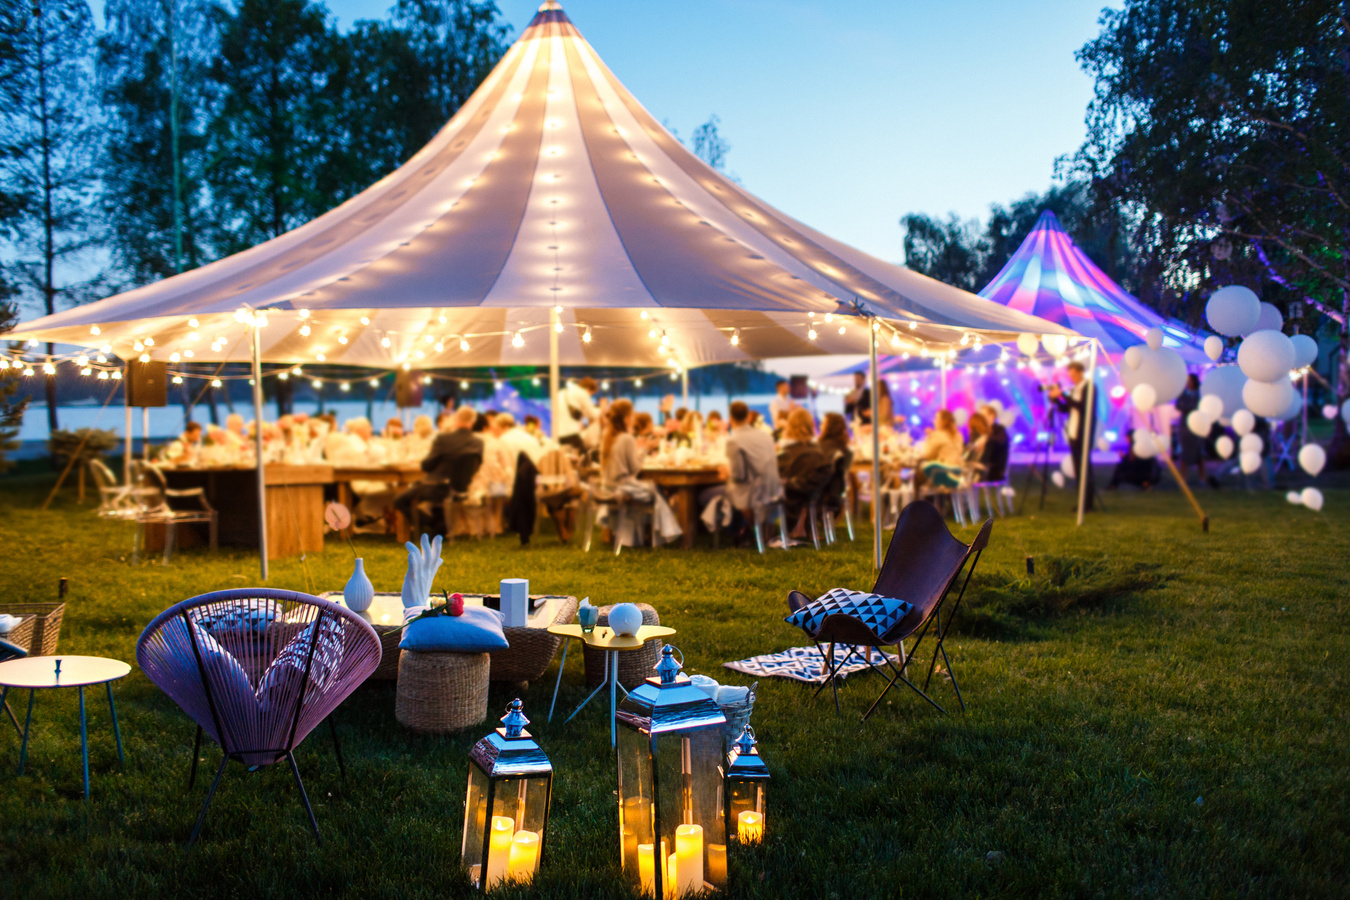 Colorful Wedding Tents at Night